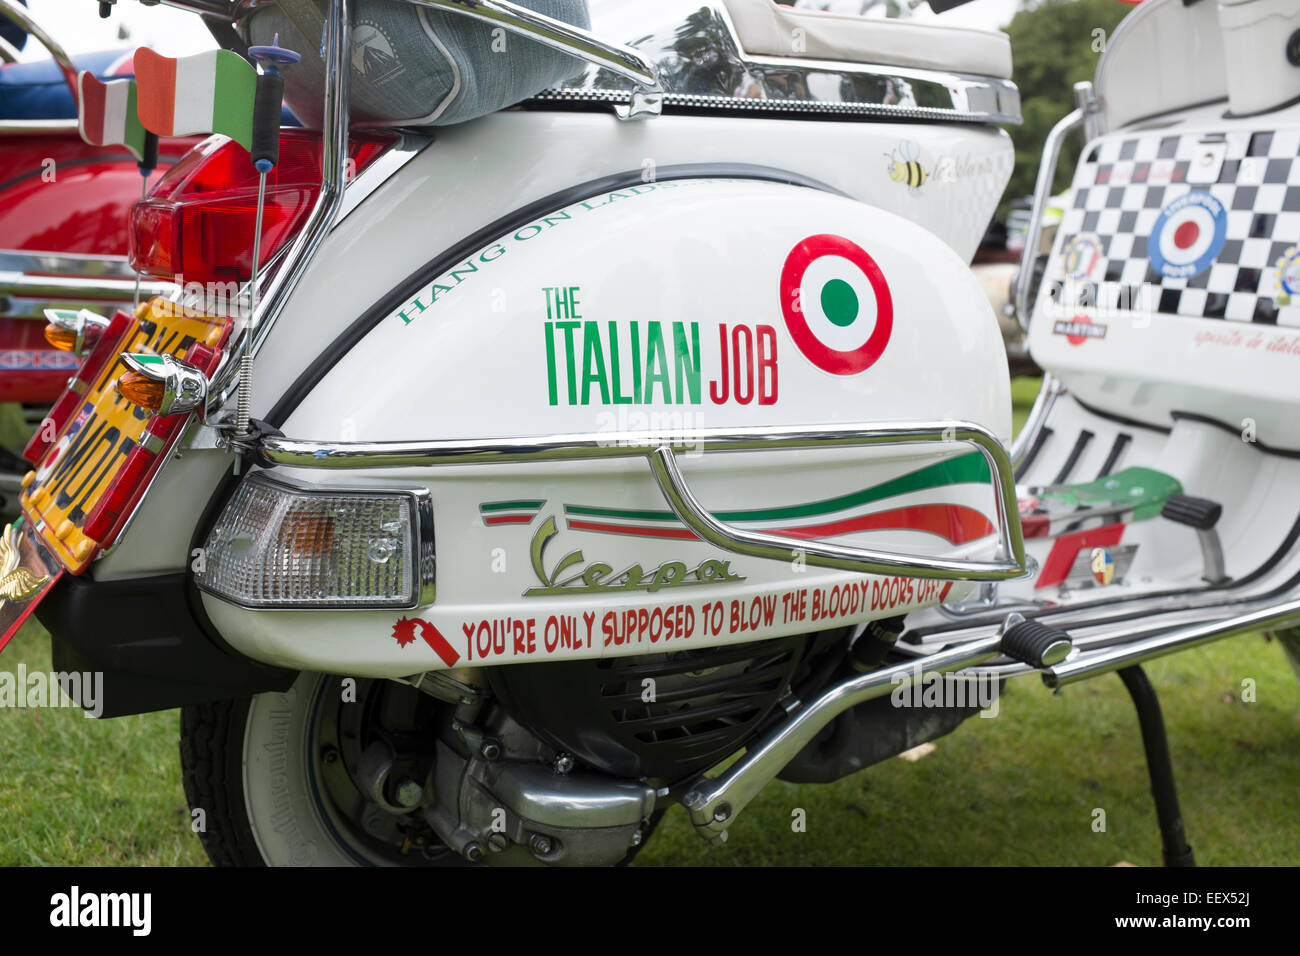 Scooters Scooter Mods The Italian Job Vespa Stock Photo